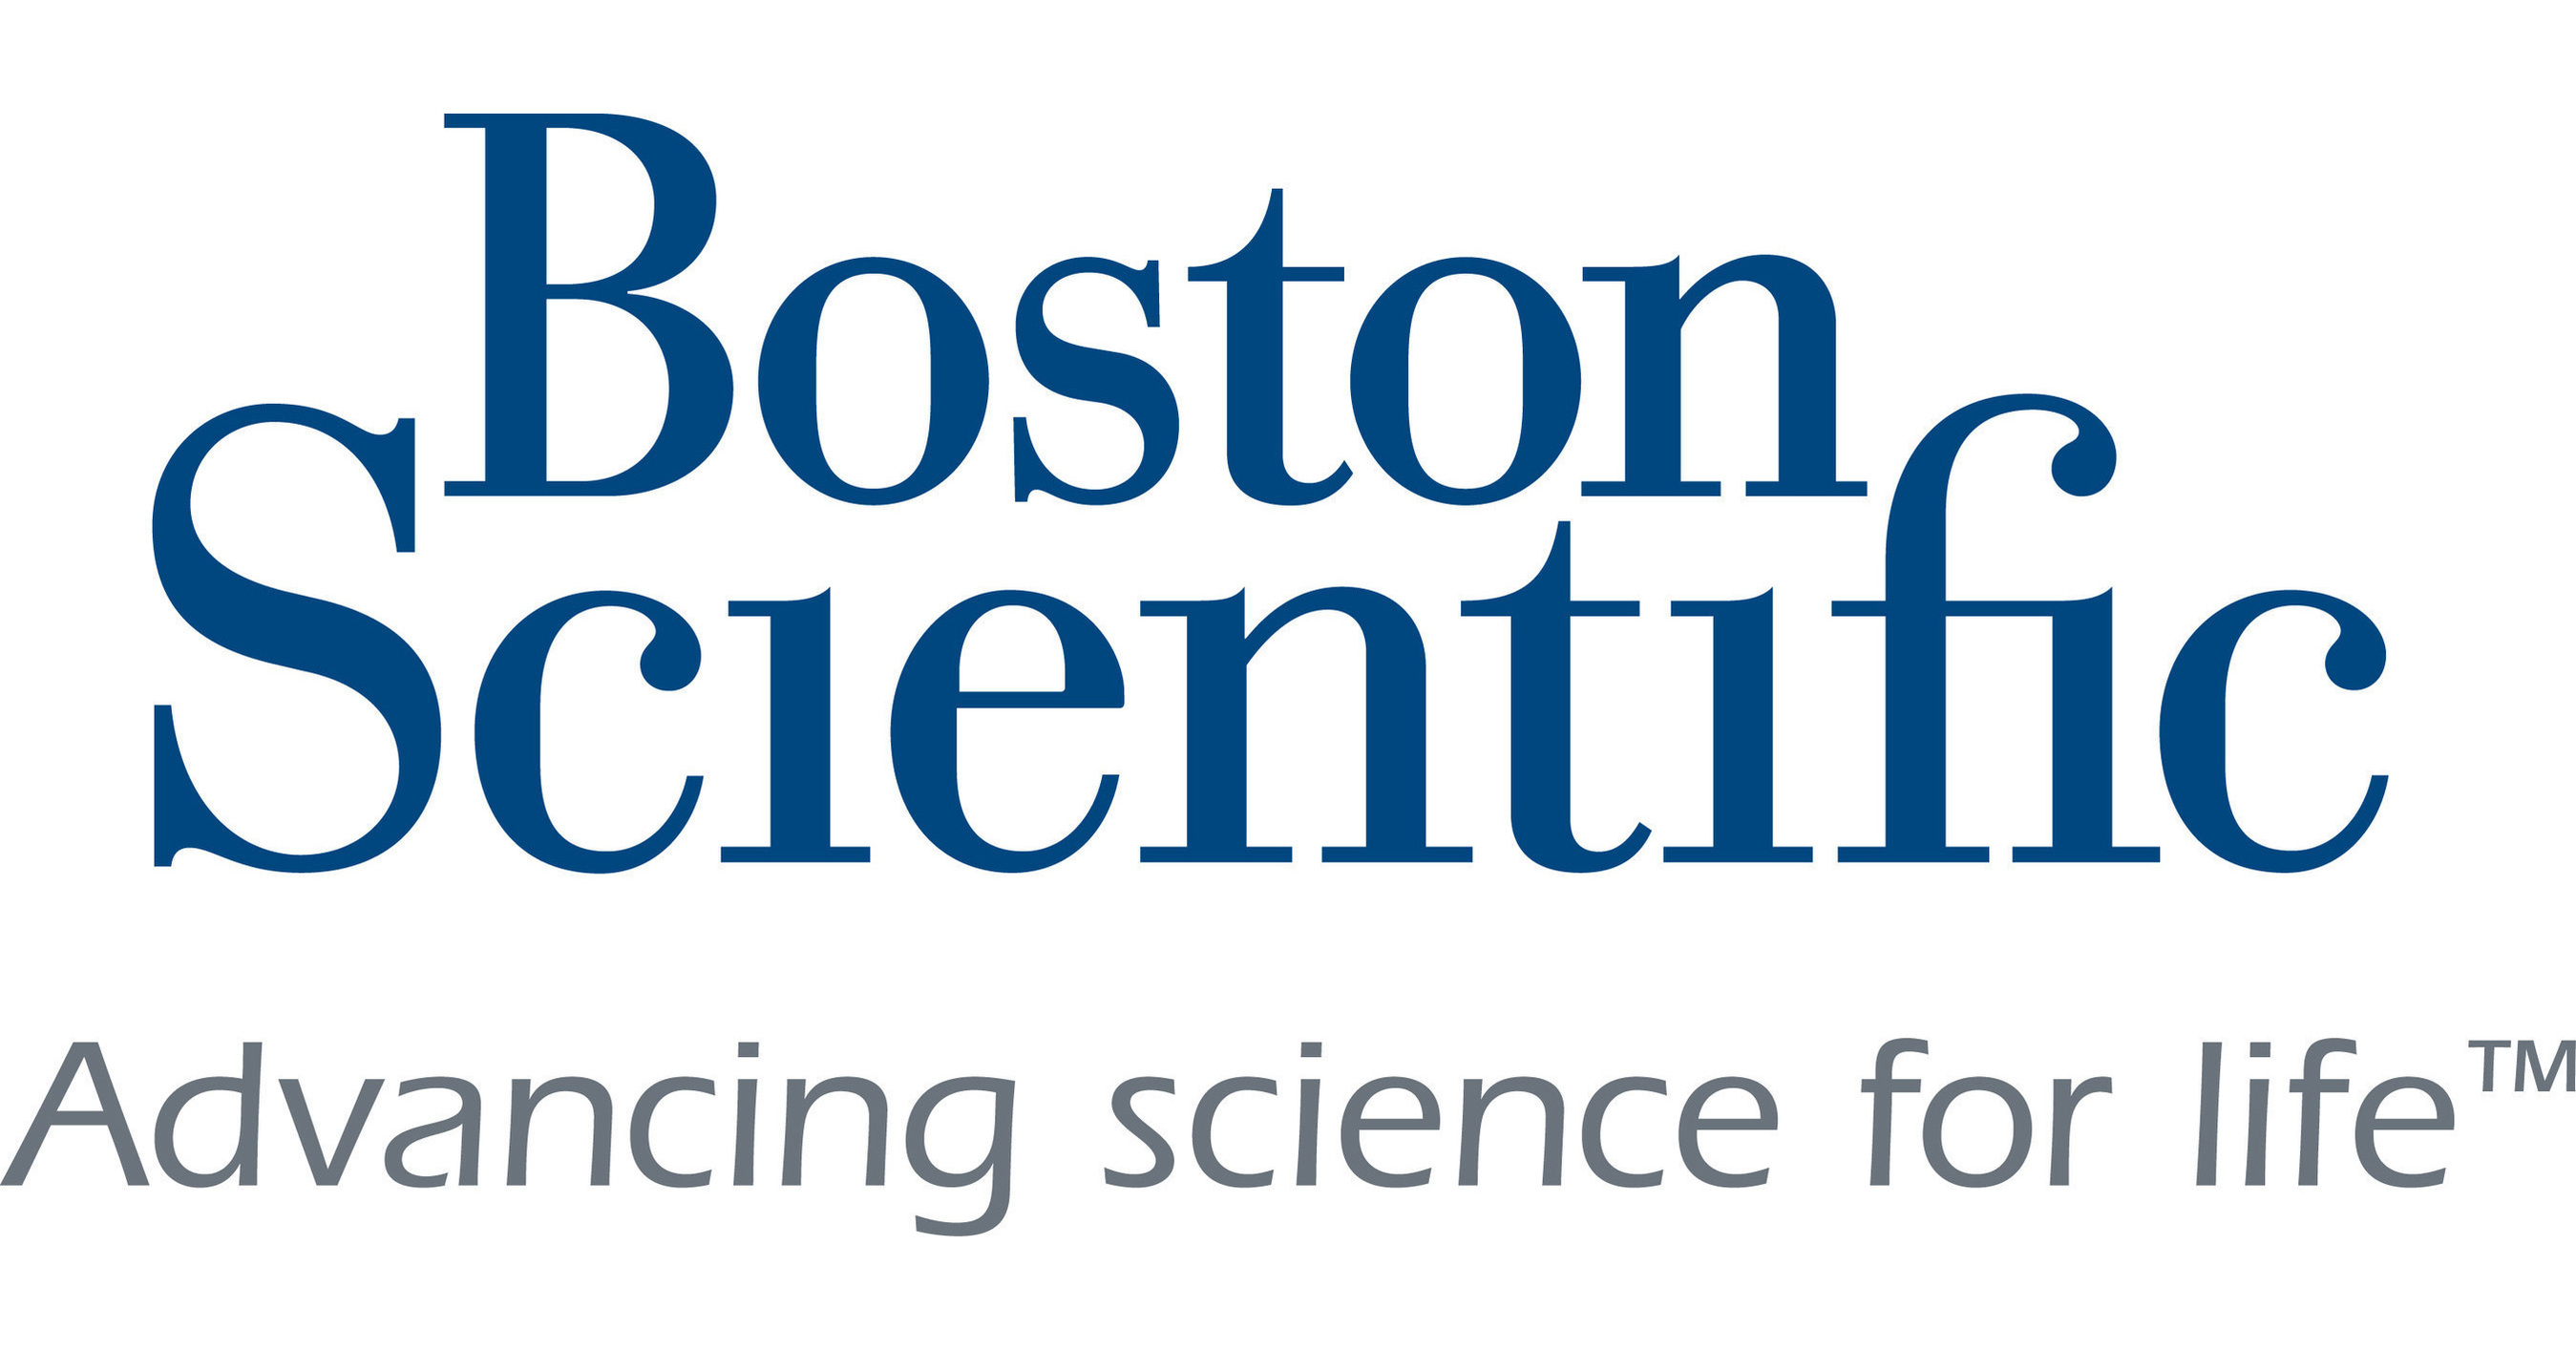 Axonics, Inc. to be acquired by Boston Scientific in groundbreaking deal.